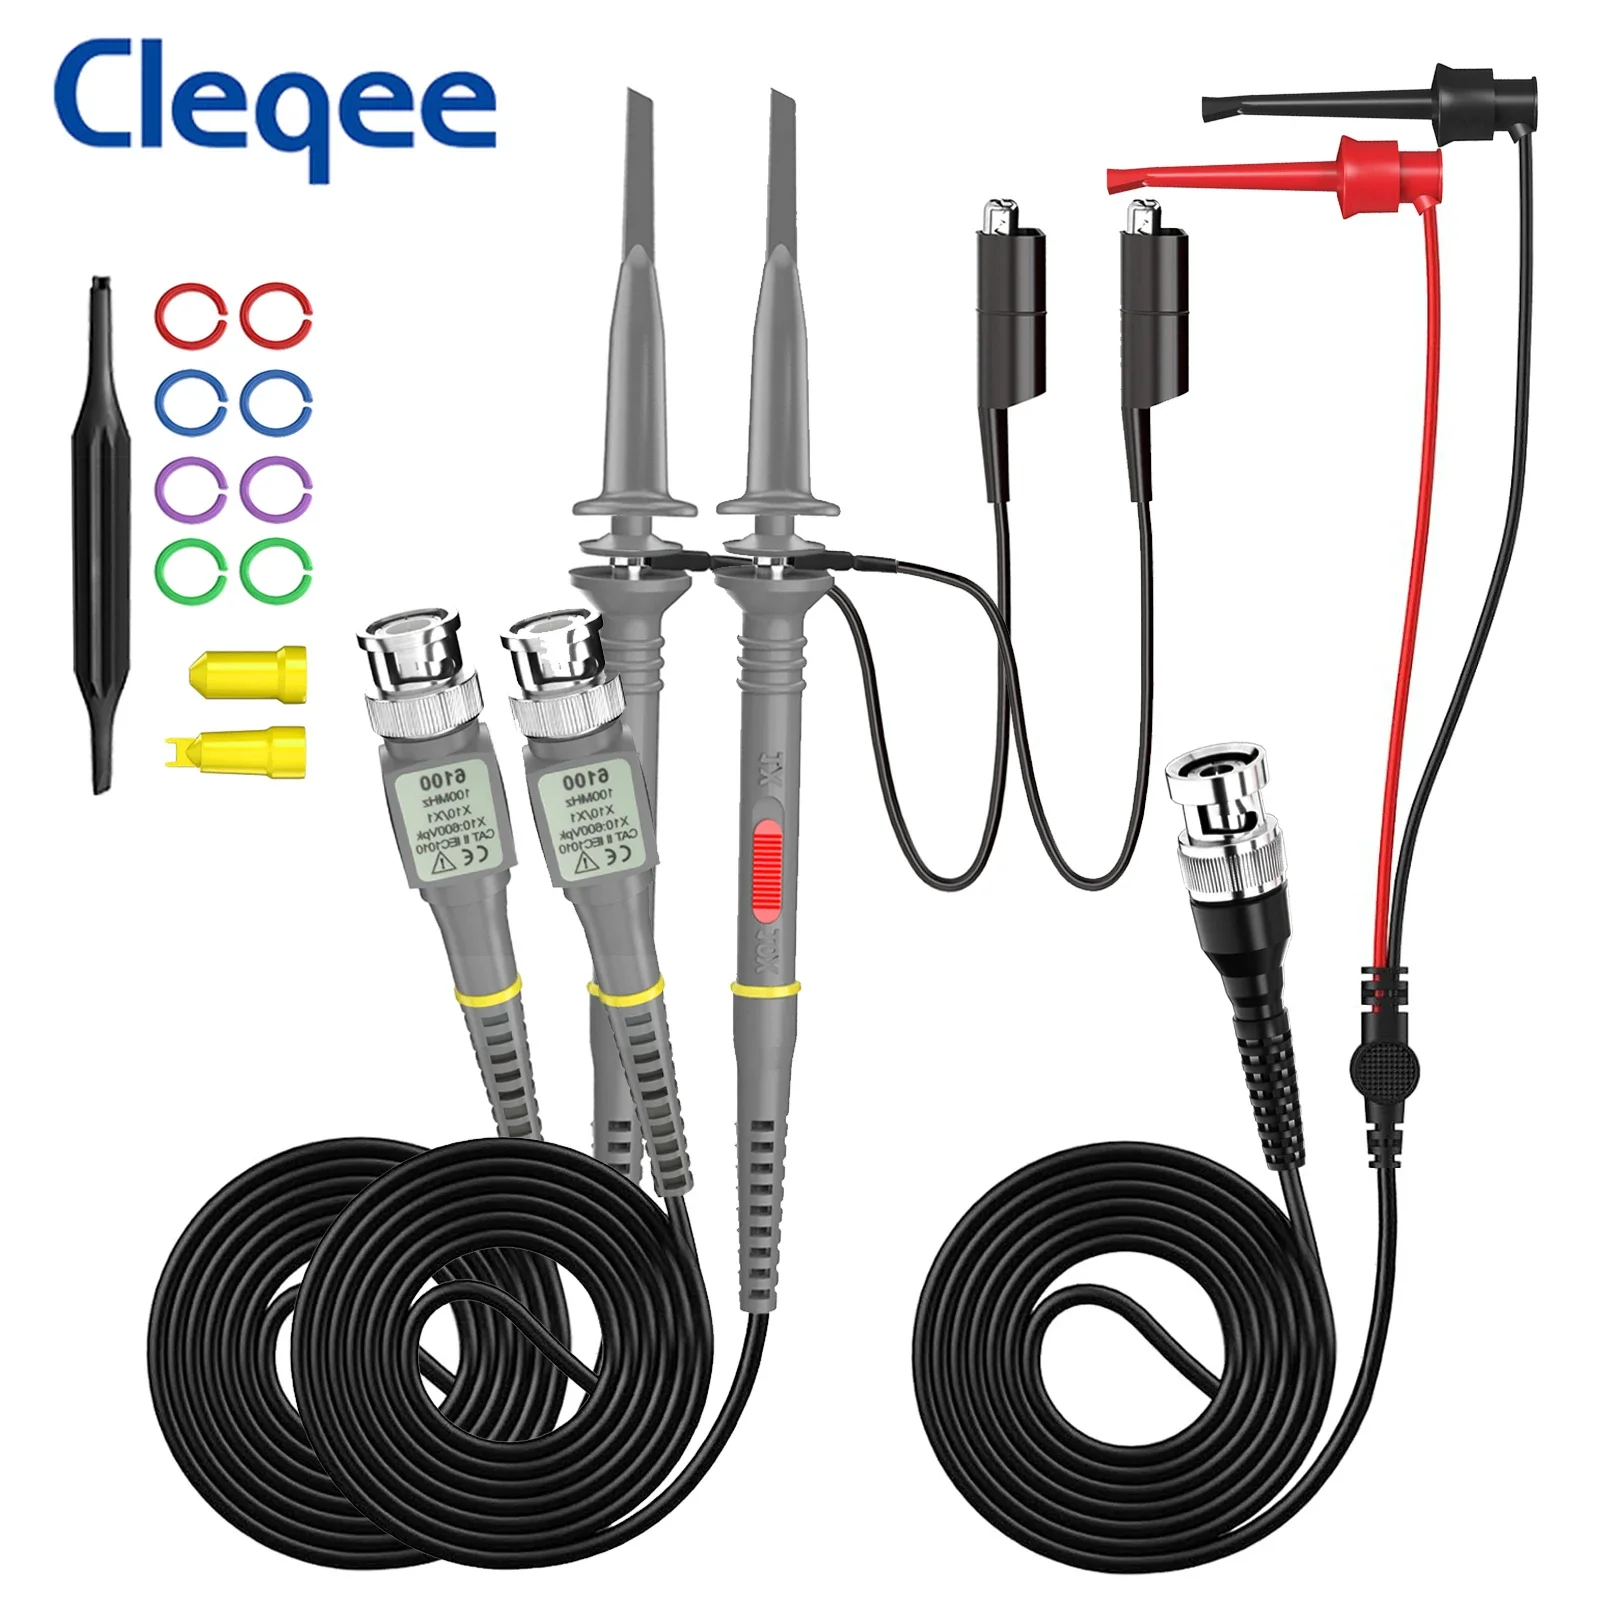 

Cleqee P6100B 100MHz Oscilloscope Probes X1/X10 + P1007B Test Hooks Leads Mini Grabber to BNC Coaxial Cable Insulated Probe 10:1